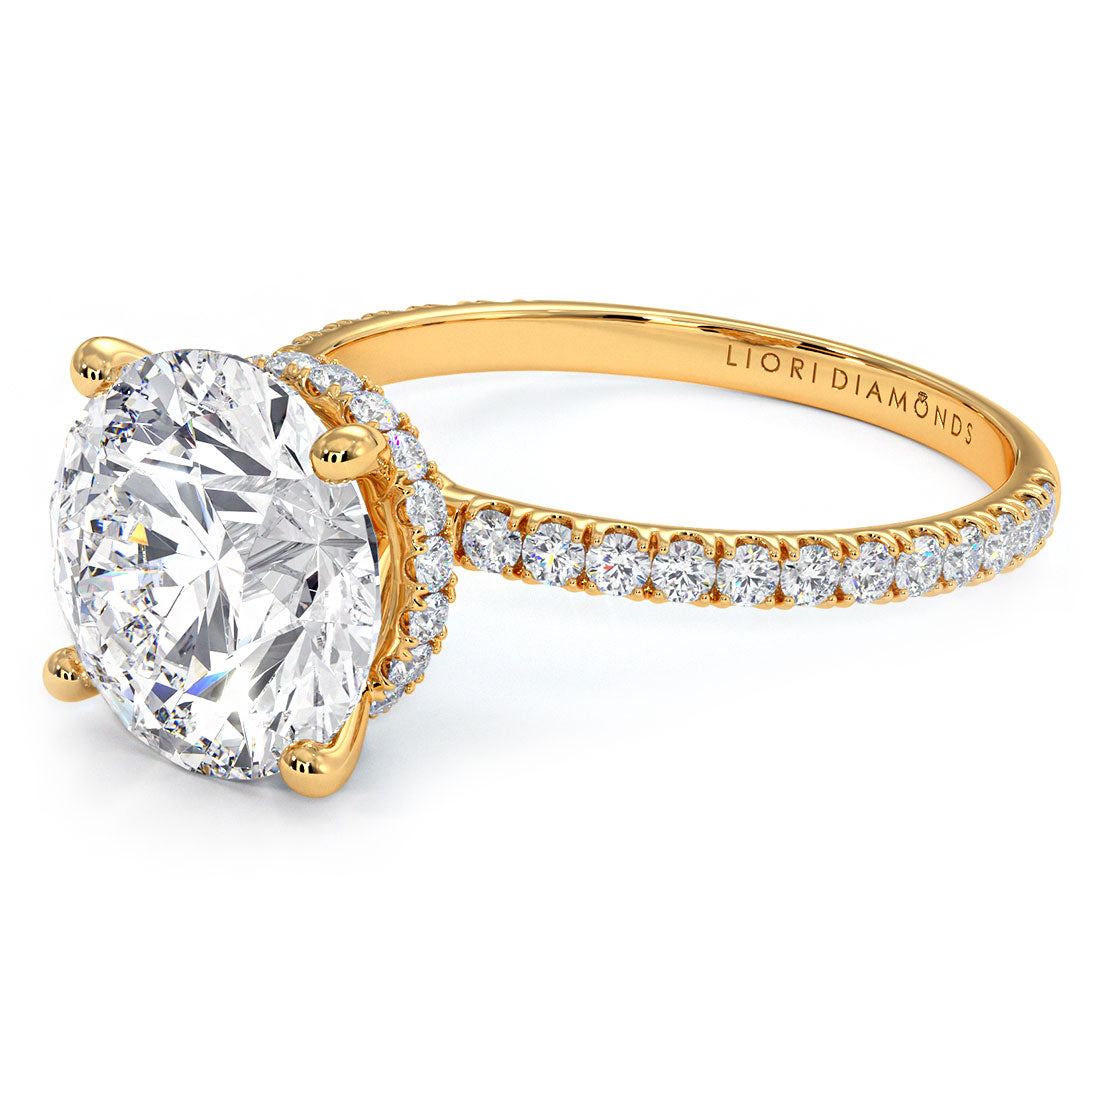 3.60ctw Round Brilliant Under Halo Petite Micropavé Lab Grown Diamond Engagement Ring set in 14k Yellow Gold